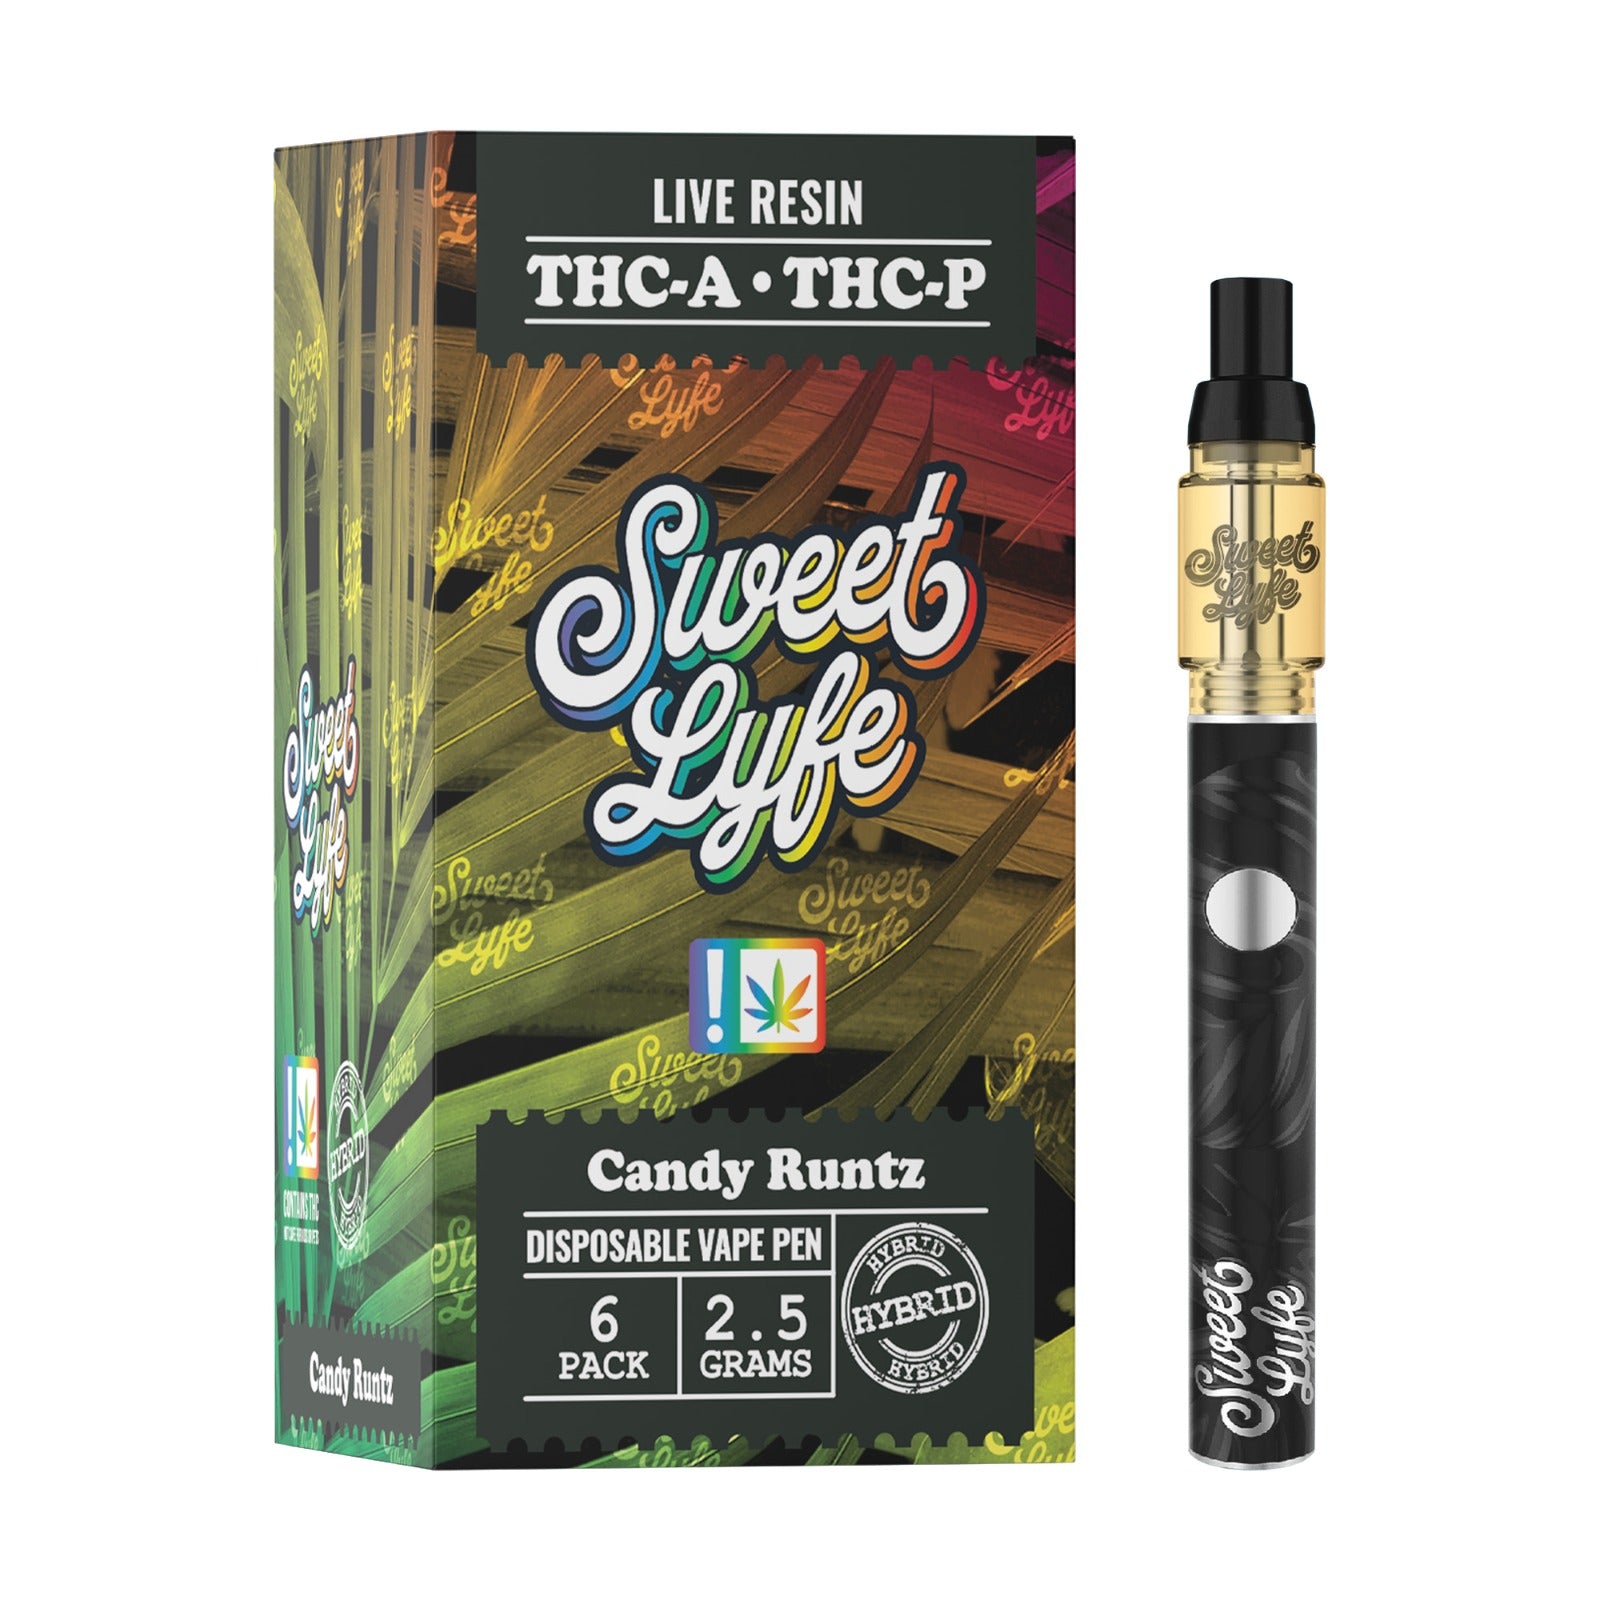 2.5ml Disposable Vape Pen Infused with Live Resin THCA & THCP - Candy Runtz - Hybrid